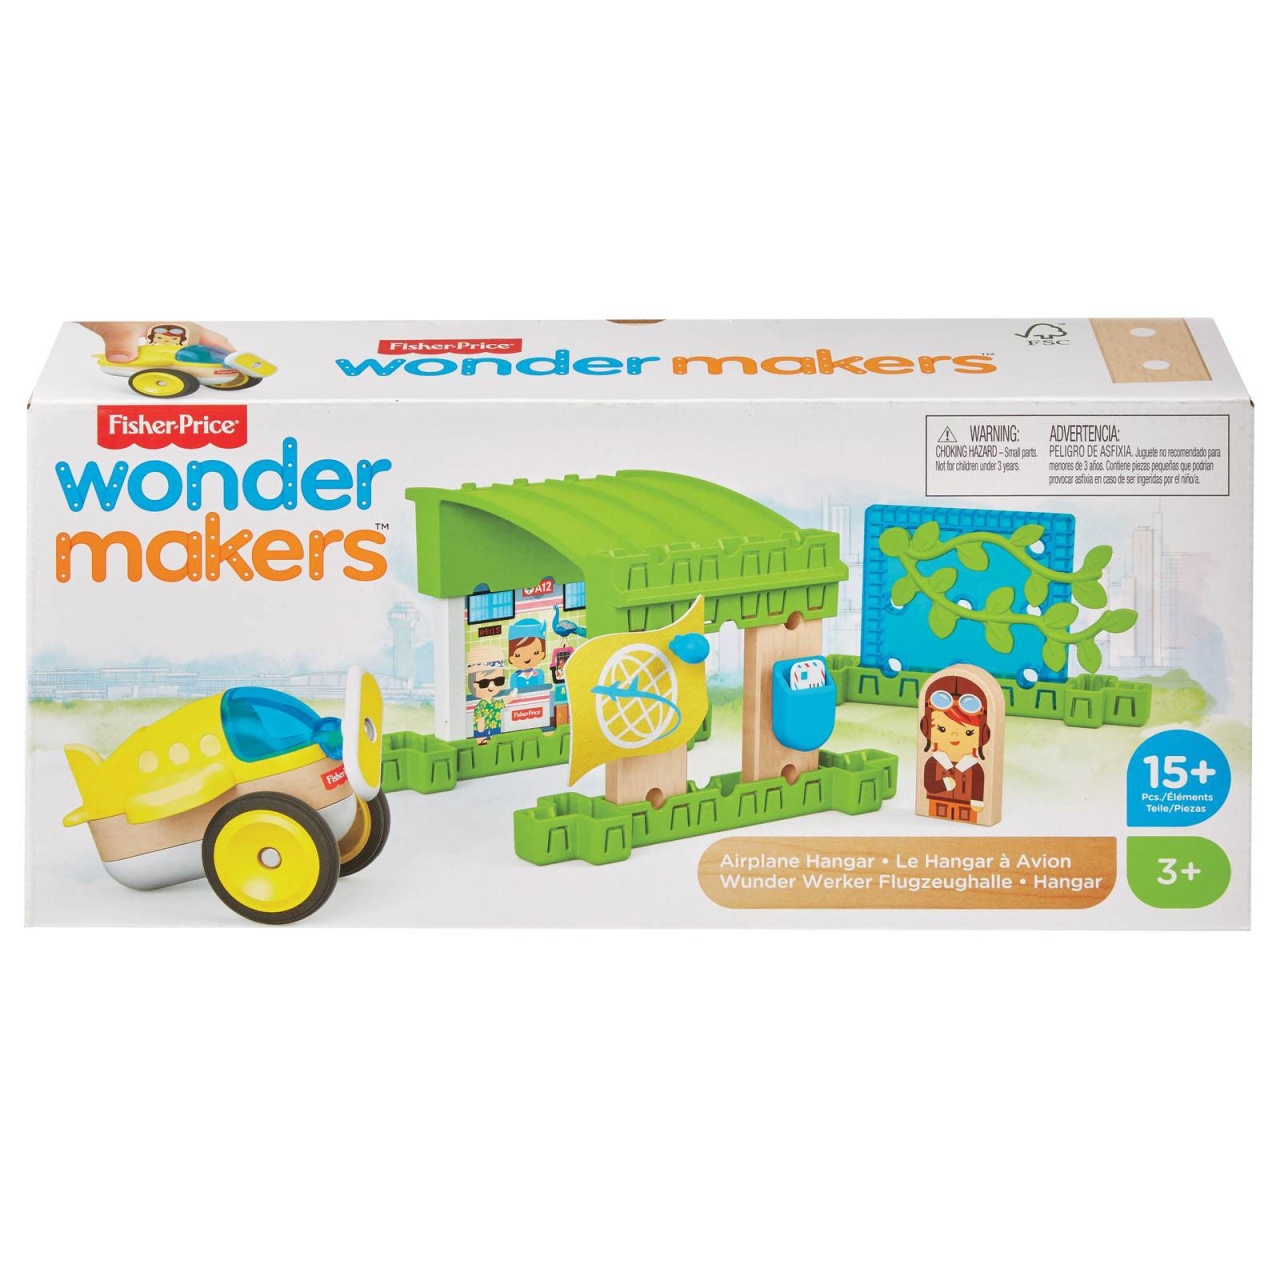 Fisher-Price Wonder makers Flugzeughalle